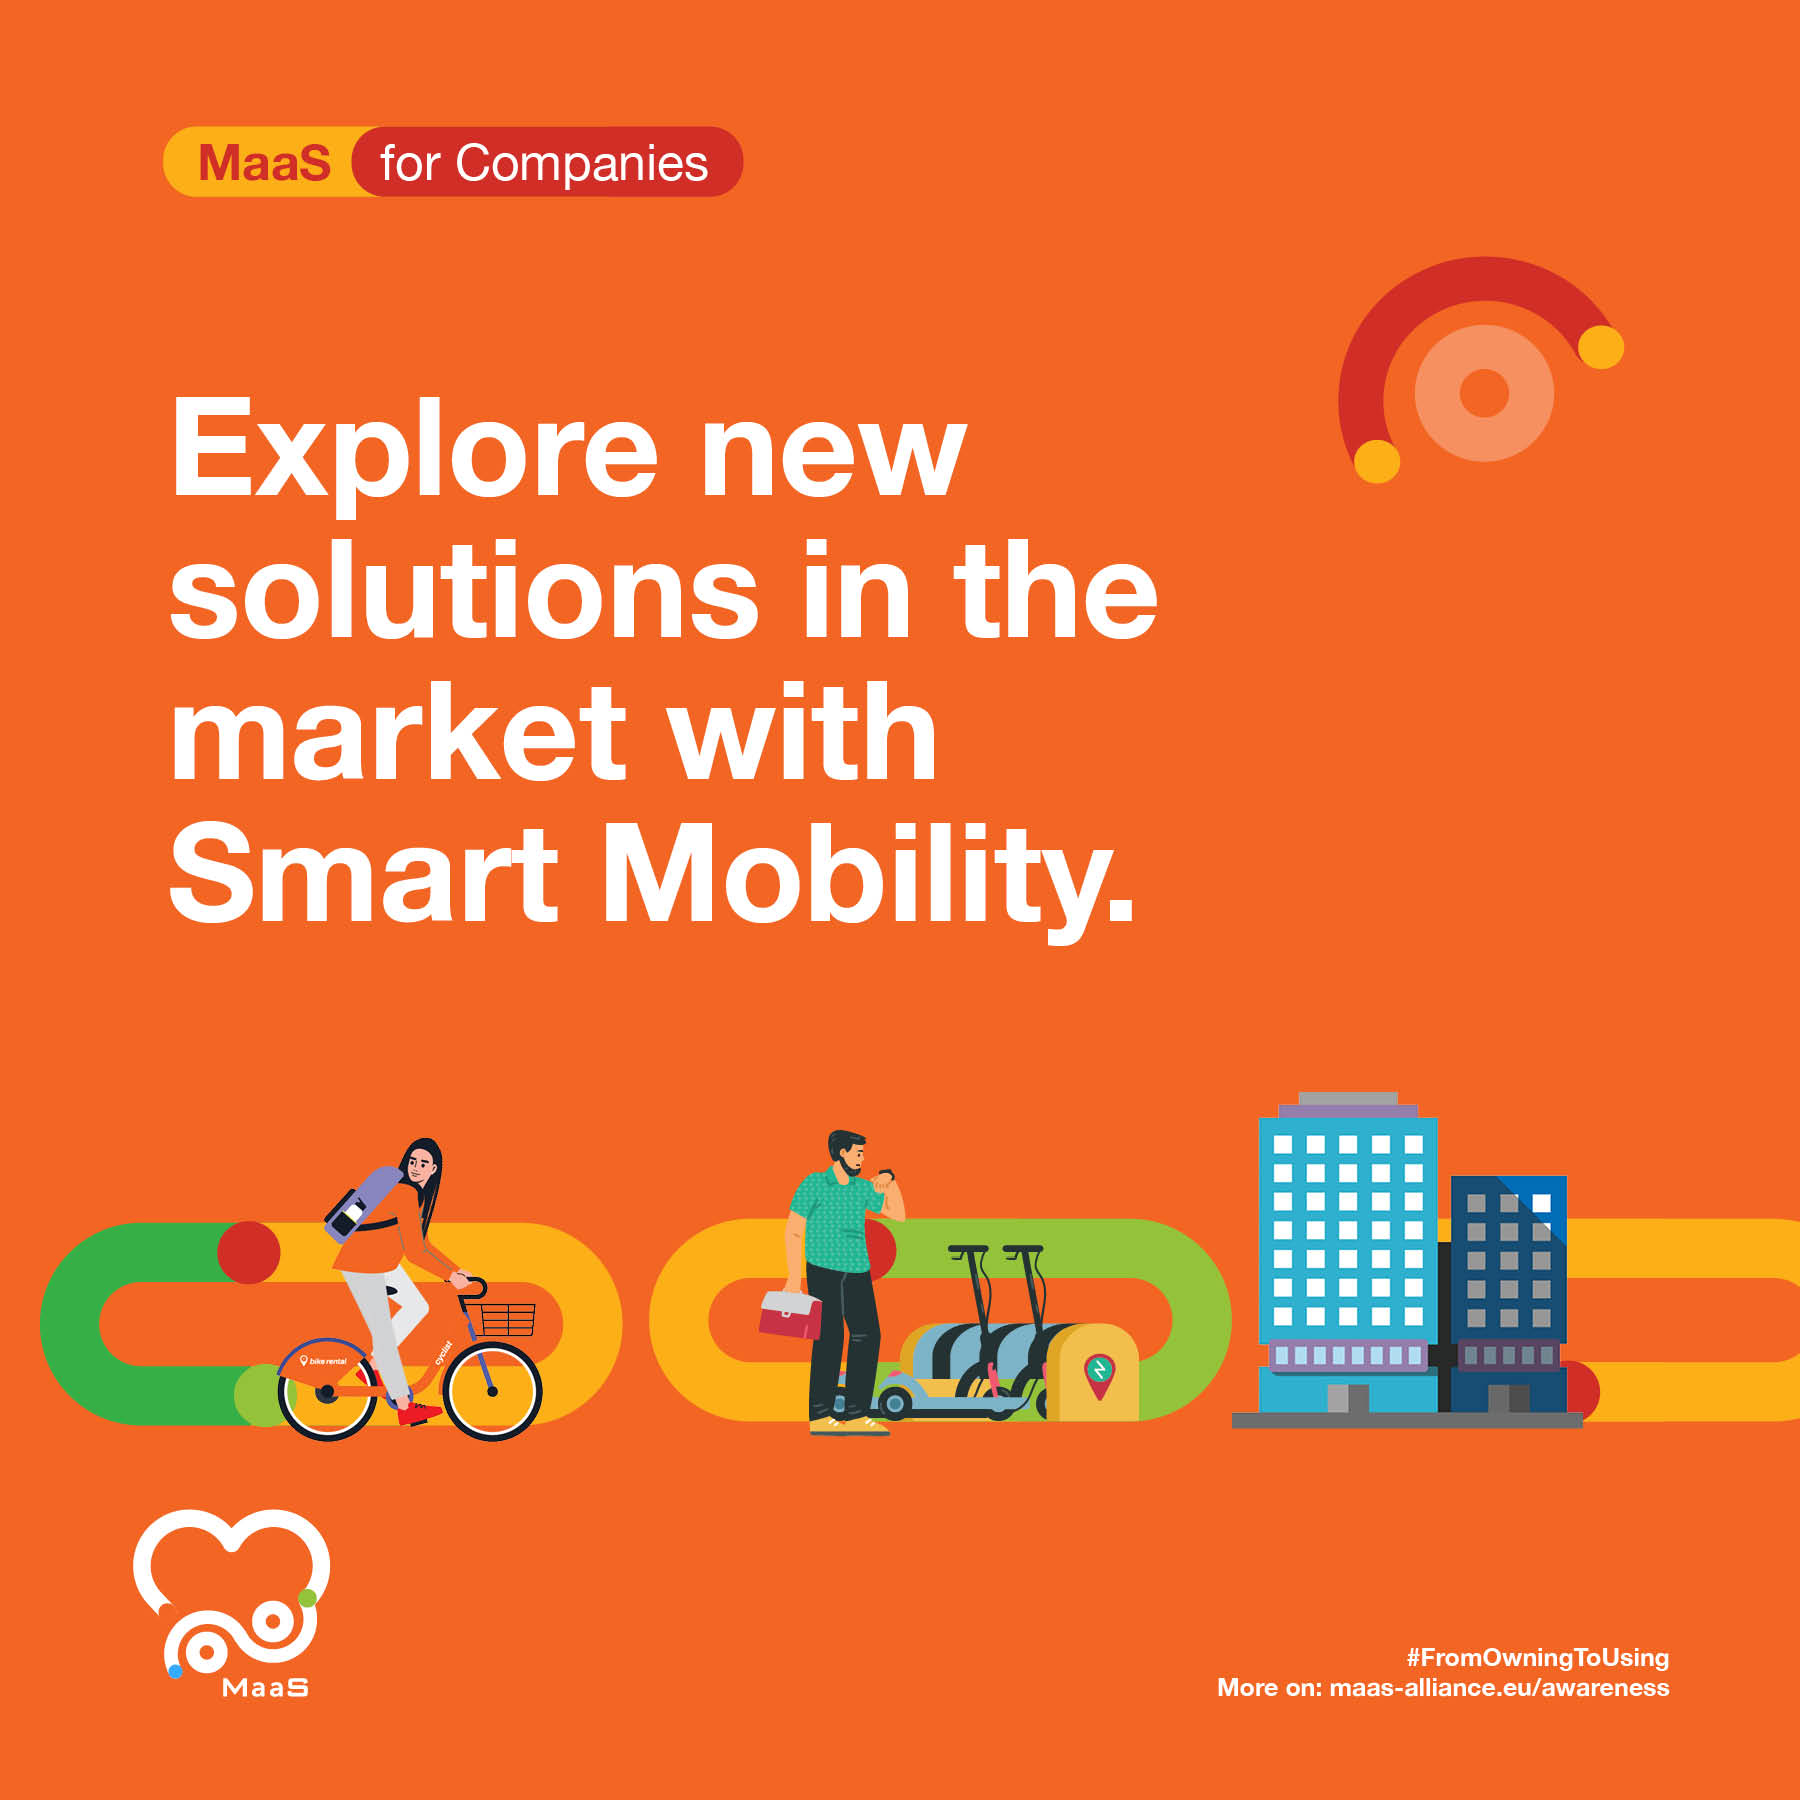 MaaS Alliance Awareness Campaign - Explore new solutions in the market with Smart Mobility